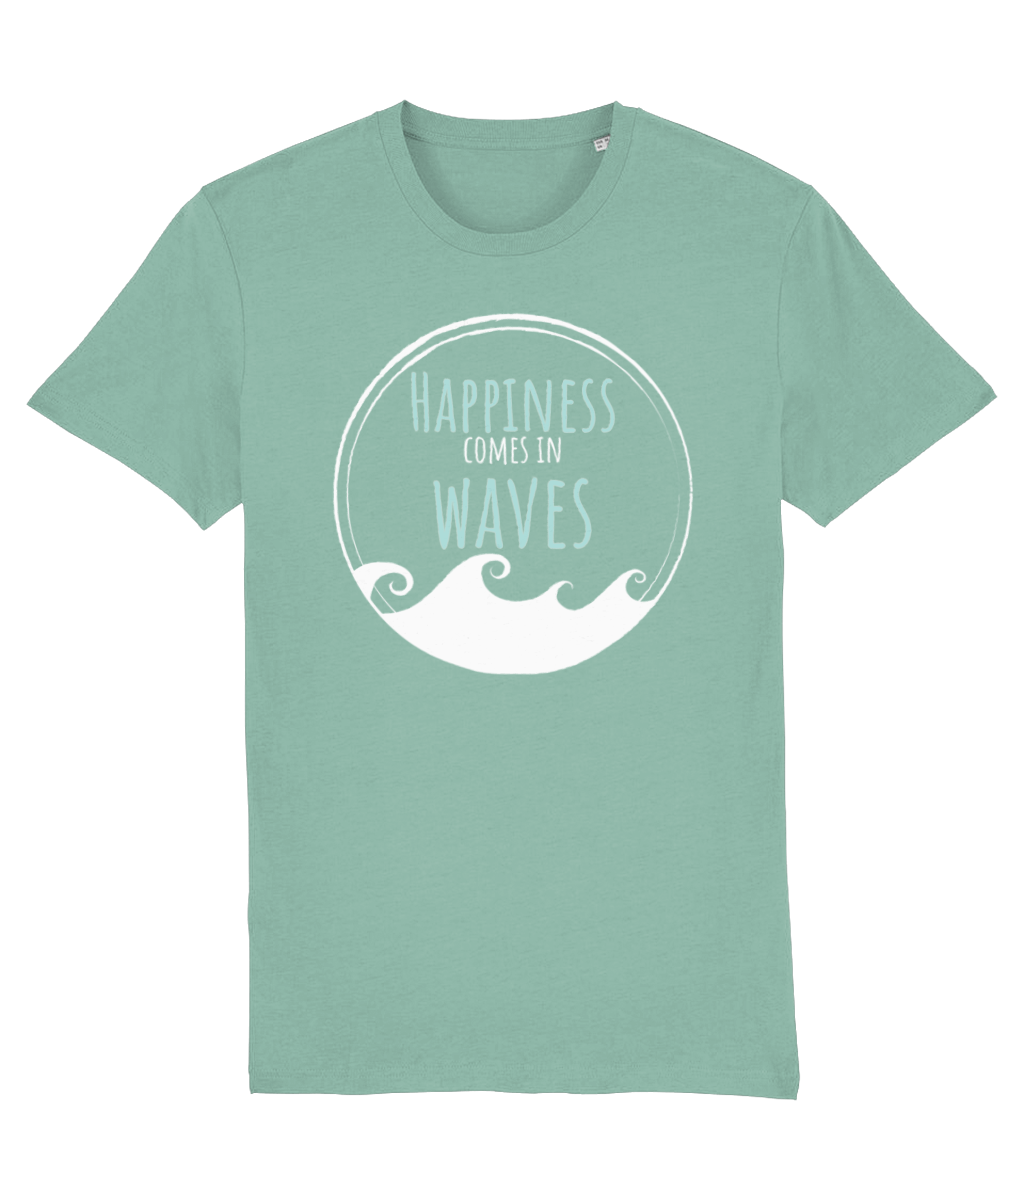 Happiness Comes In Waves Organic Cotton T-Shirt